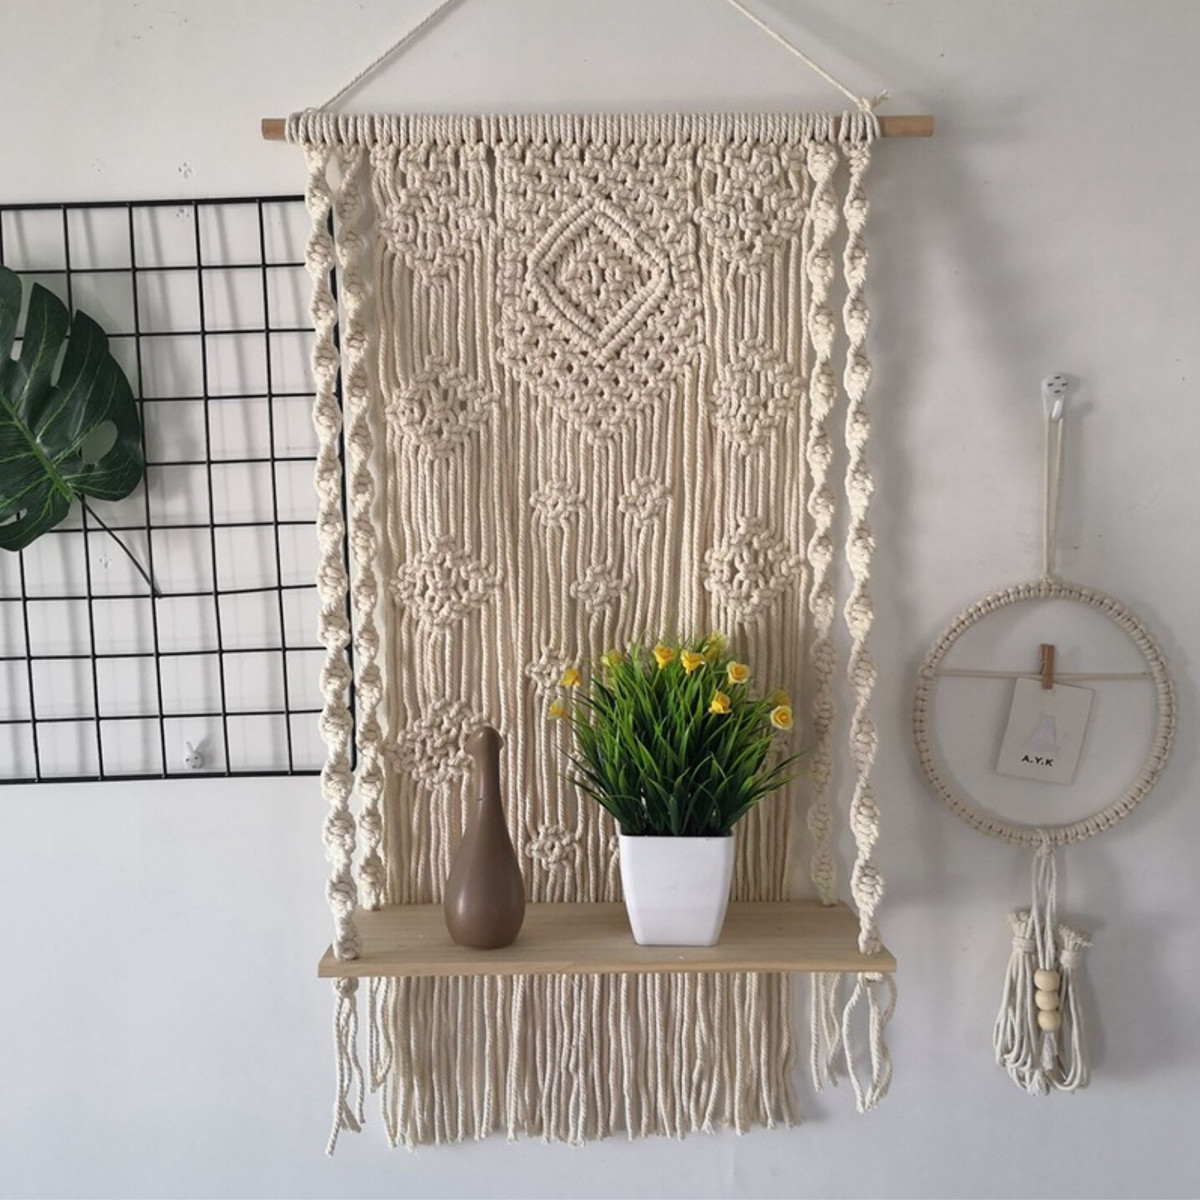 Wall-Hanging-Rack-Macrame-Knitted-Rope-Woven-Tassel-Wall-Hanging-Handmade-Tapestry-Display-Stand-Hom-1795856-4